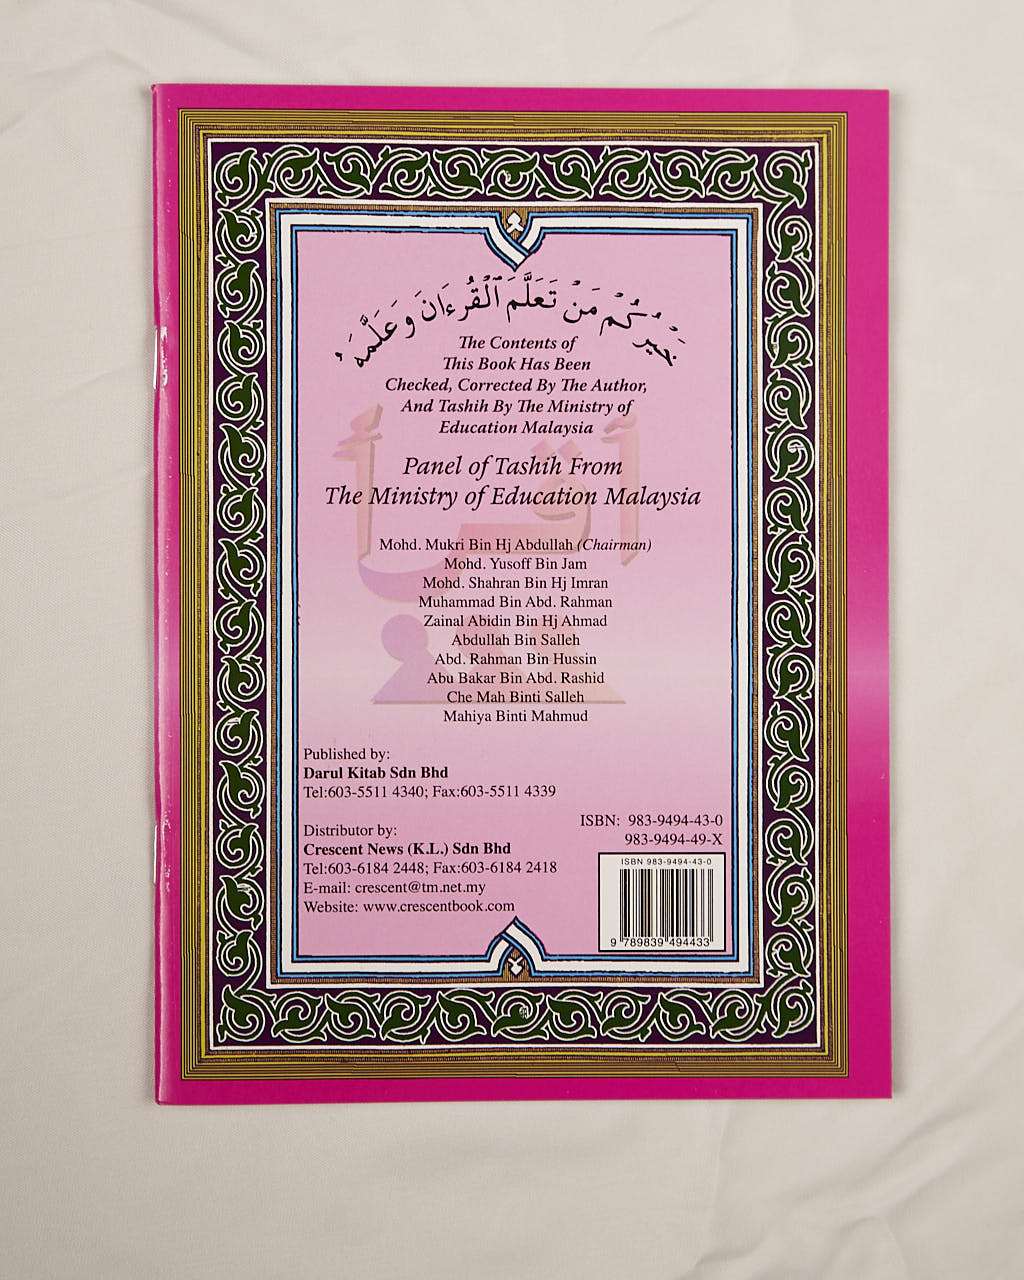 IQRA Quick Method of Learning to Read Quran - Set of 6 - Islamic Book - Fajr Noor